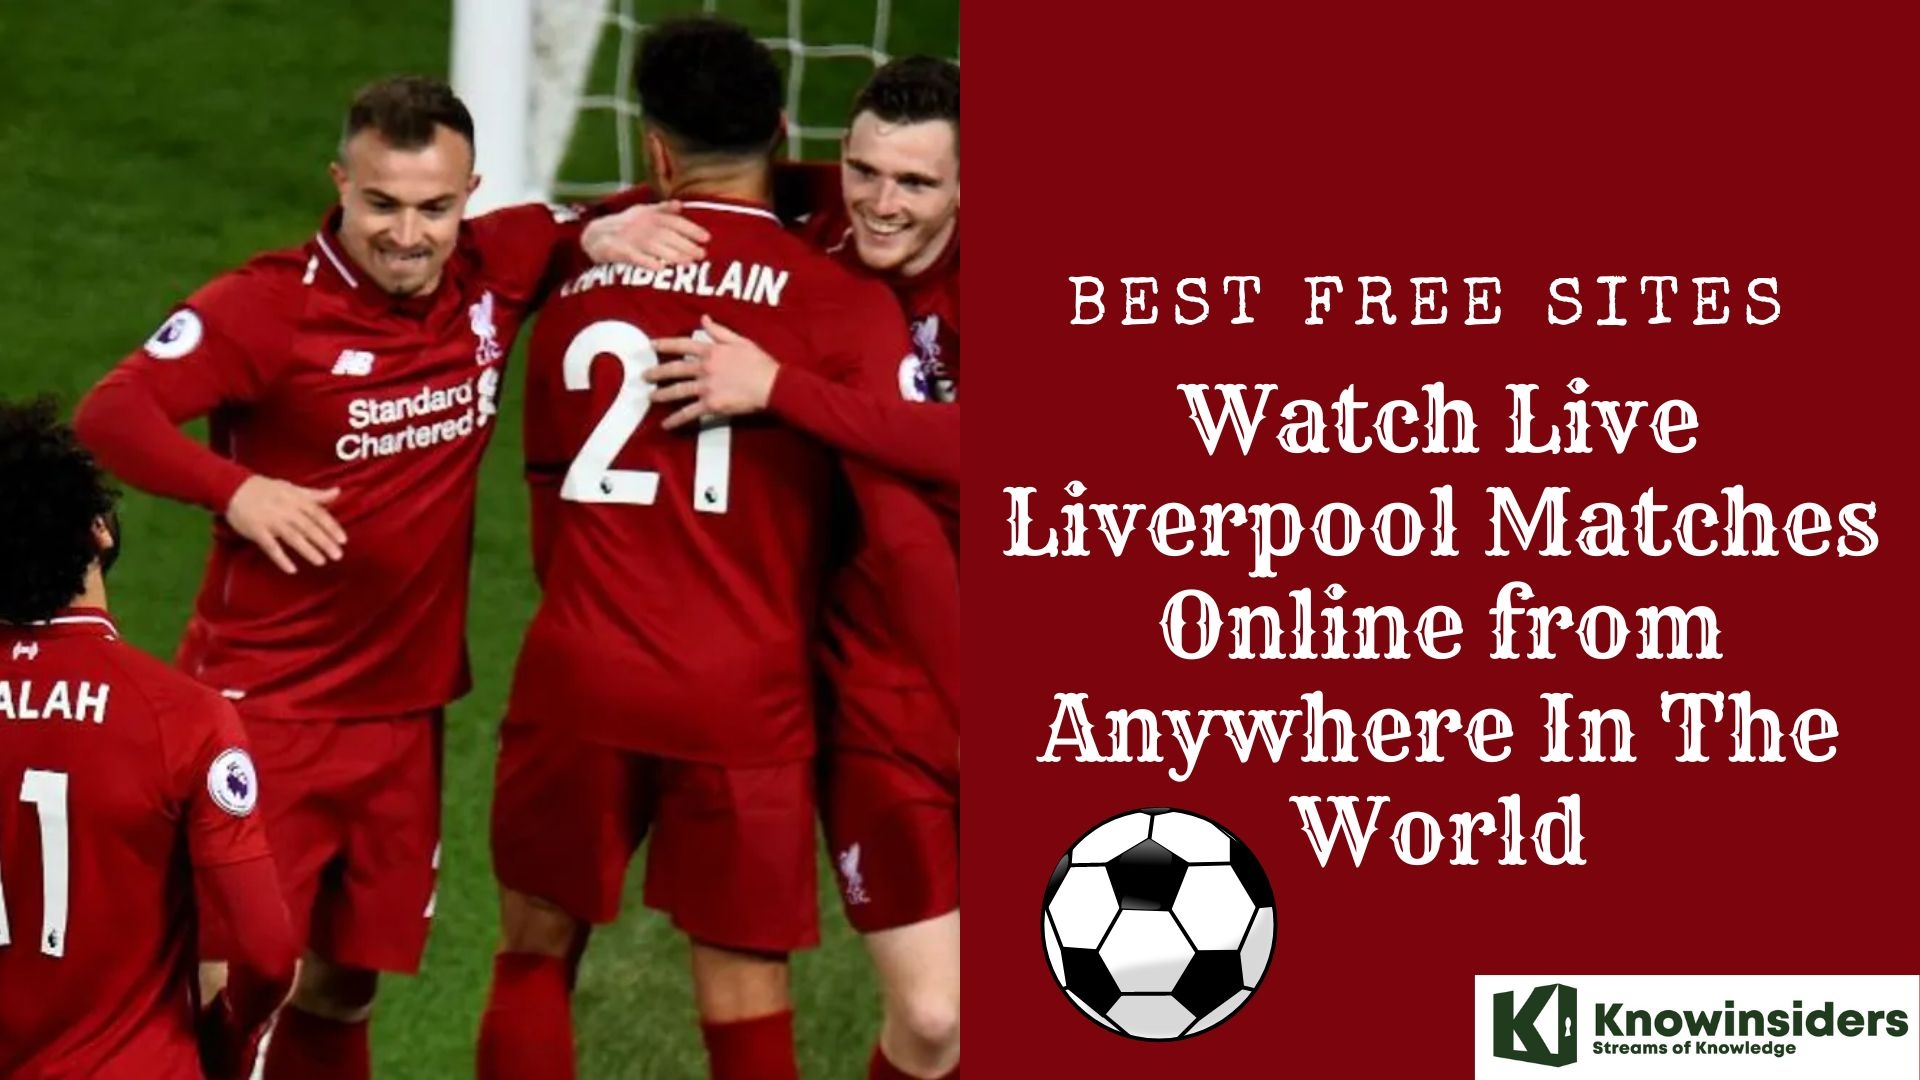 Best Free Sites to Watch Live Liverpool Matches Online from Anywhere In The World